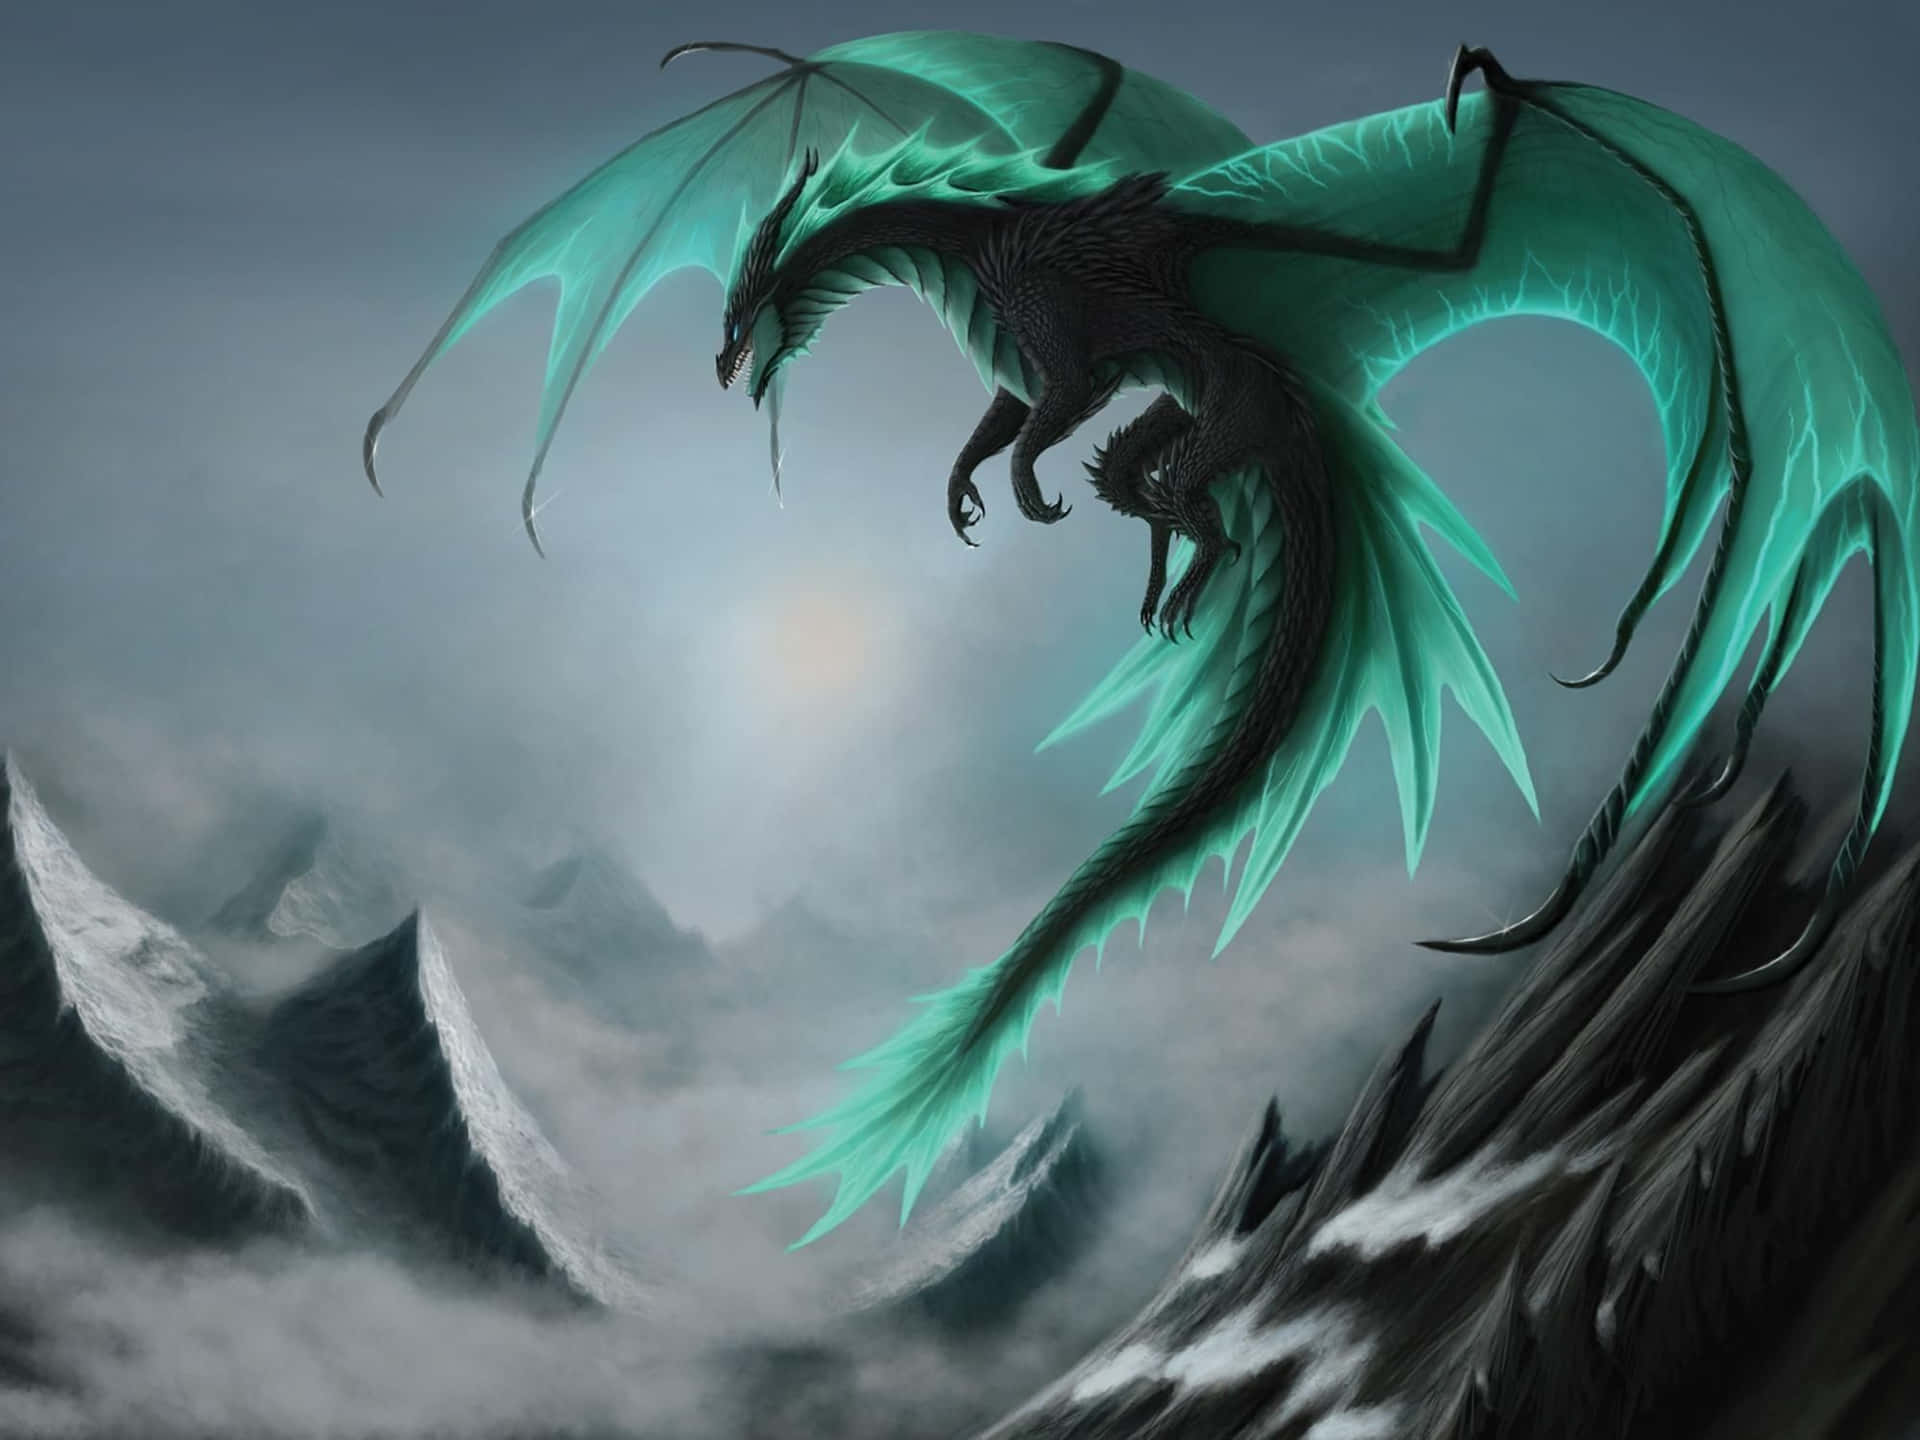 A fierce and majestic Awesome Cool Dragon spreading its wings. Wallpaper